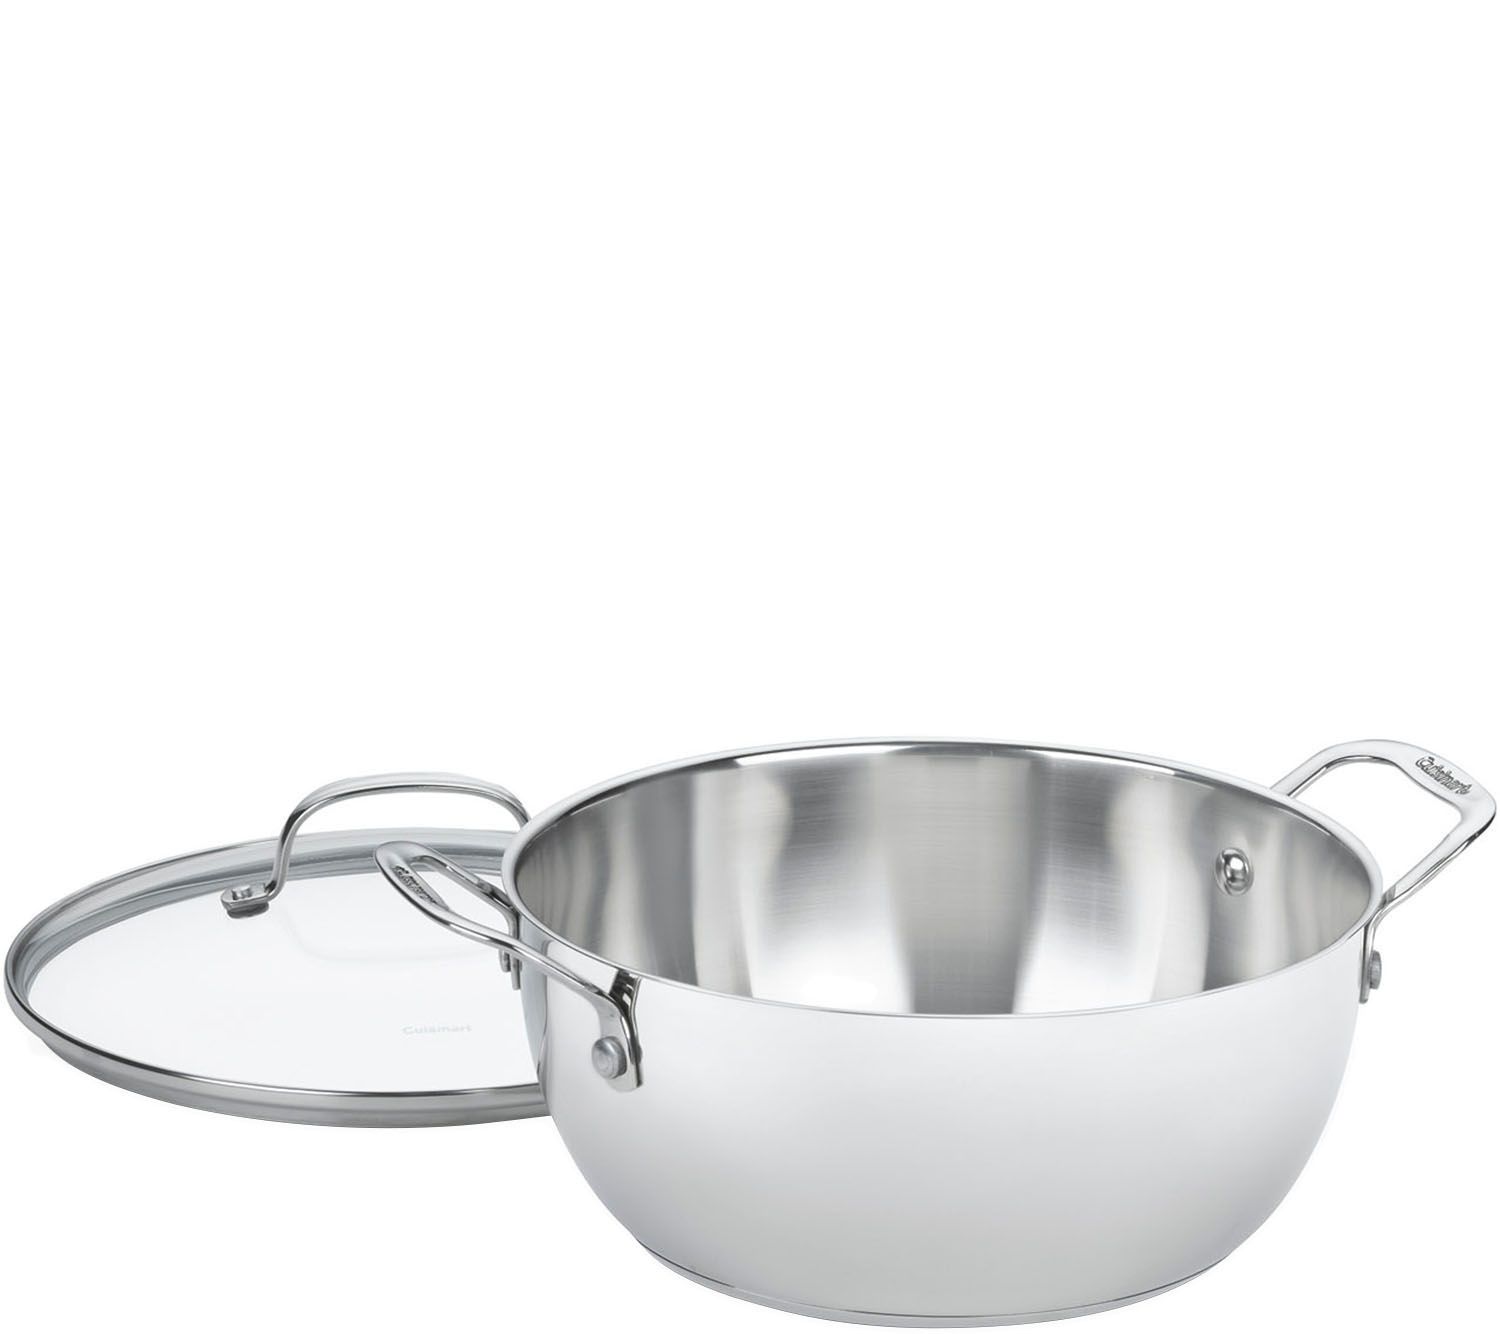 Cuisinart Chef's Classic Stainless 5.5qt Saute Pan